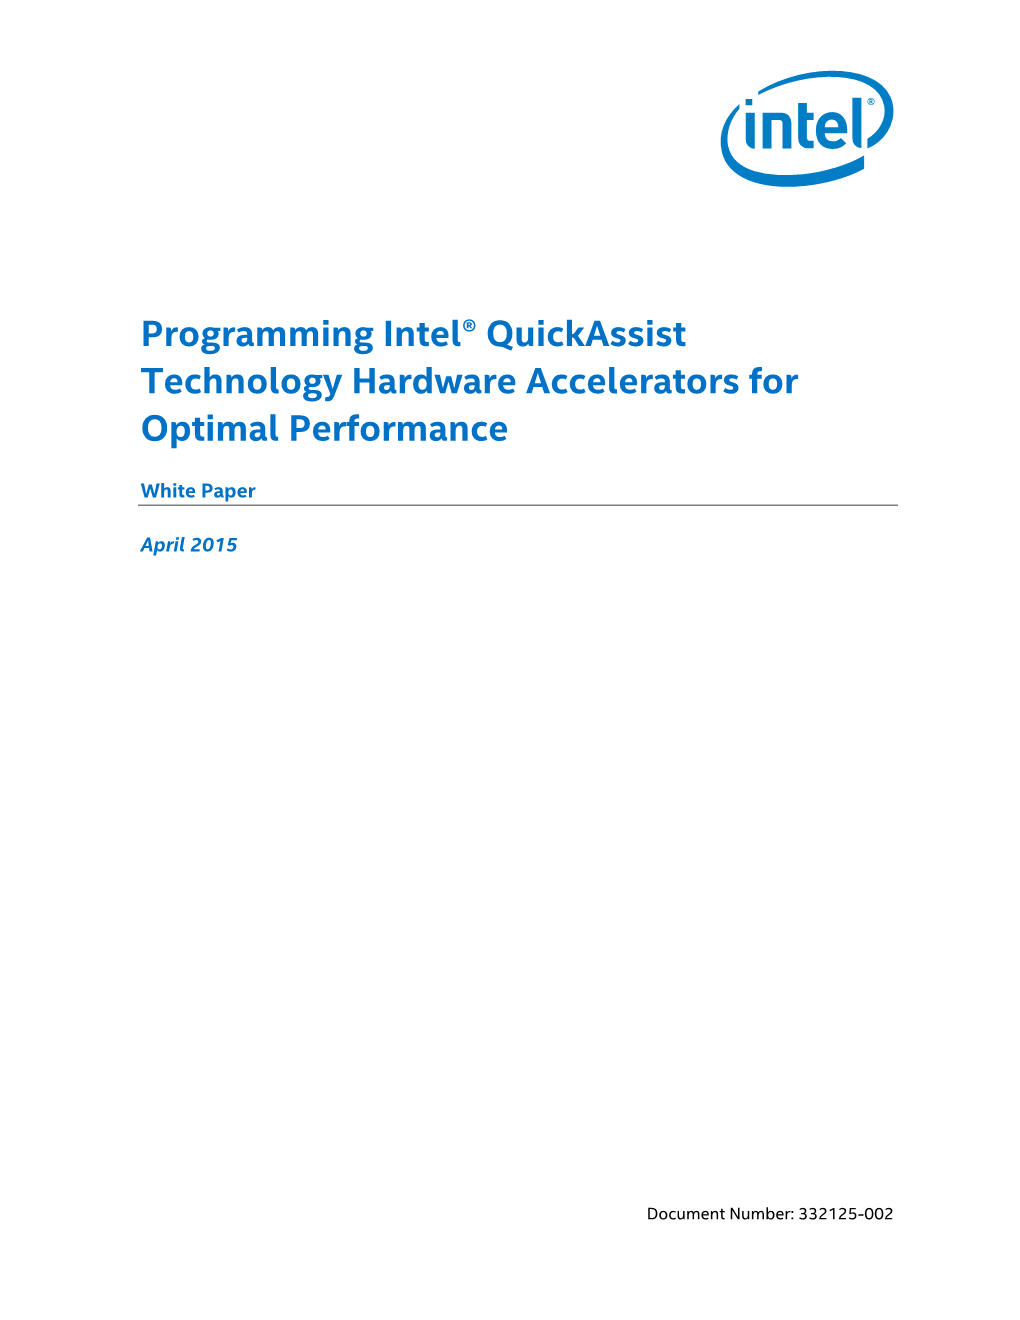 Programming Intel® Quickassist Technology Hardware Accelerators for Optimal Performance White Paper